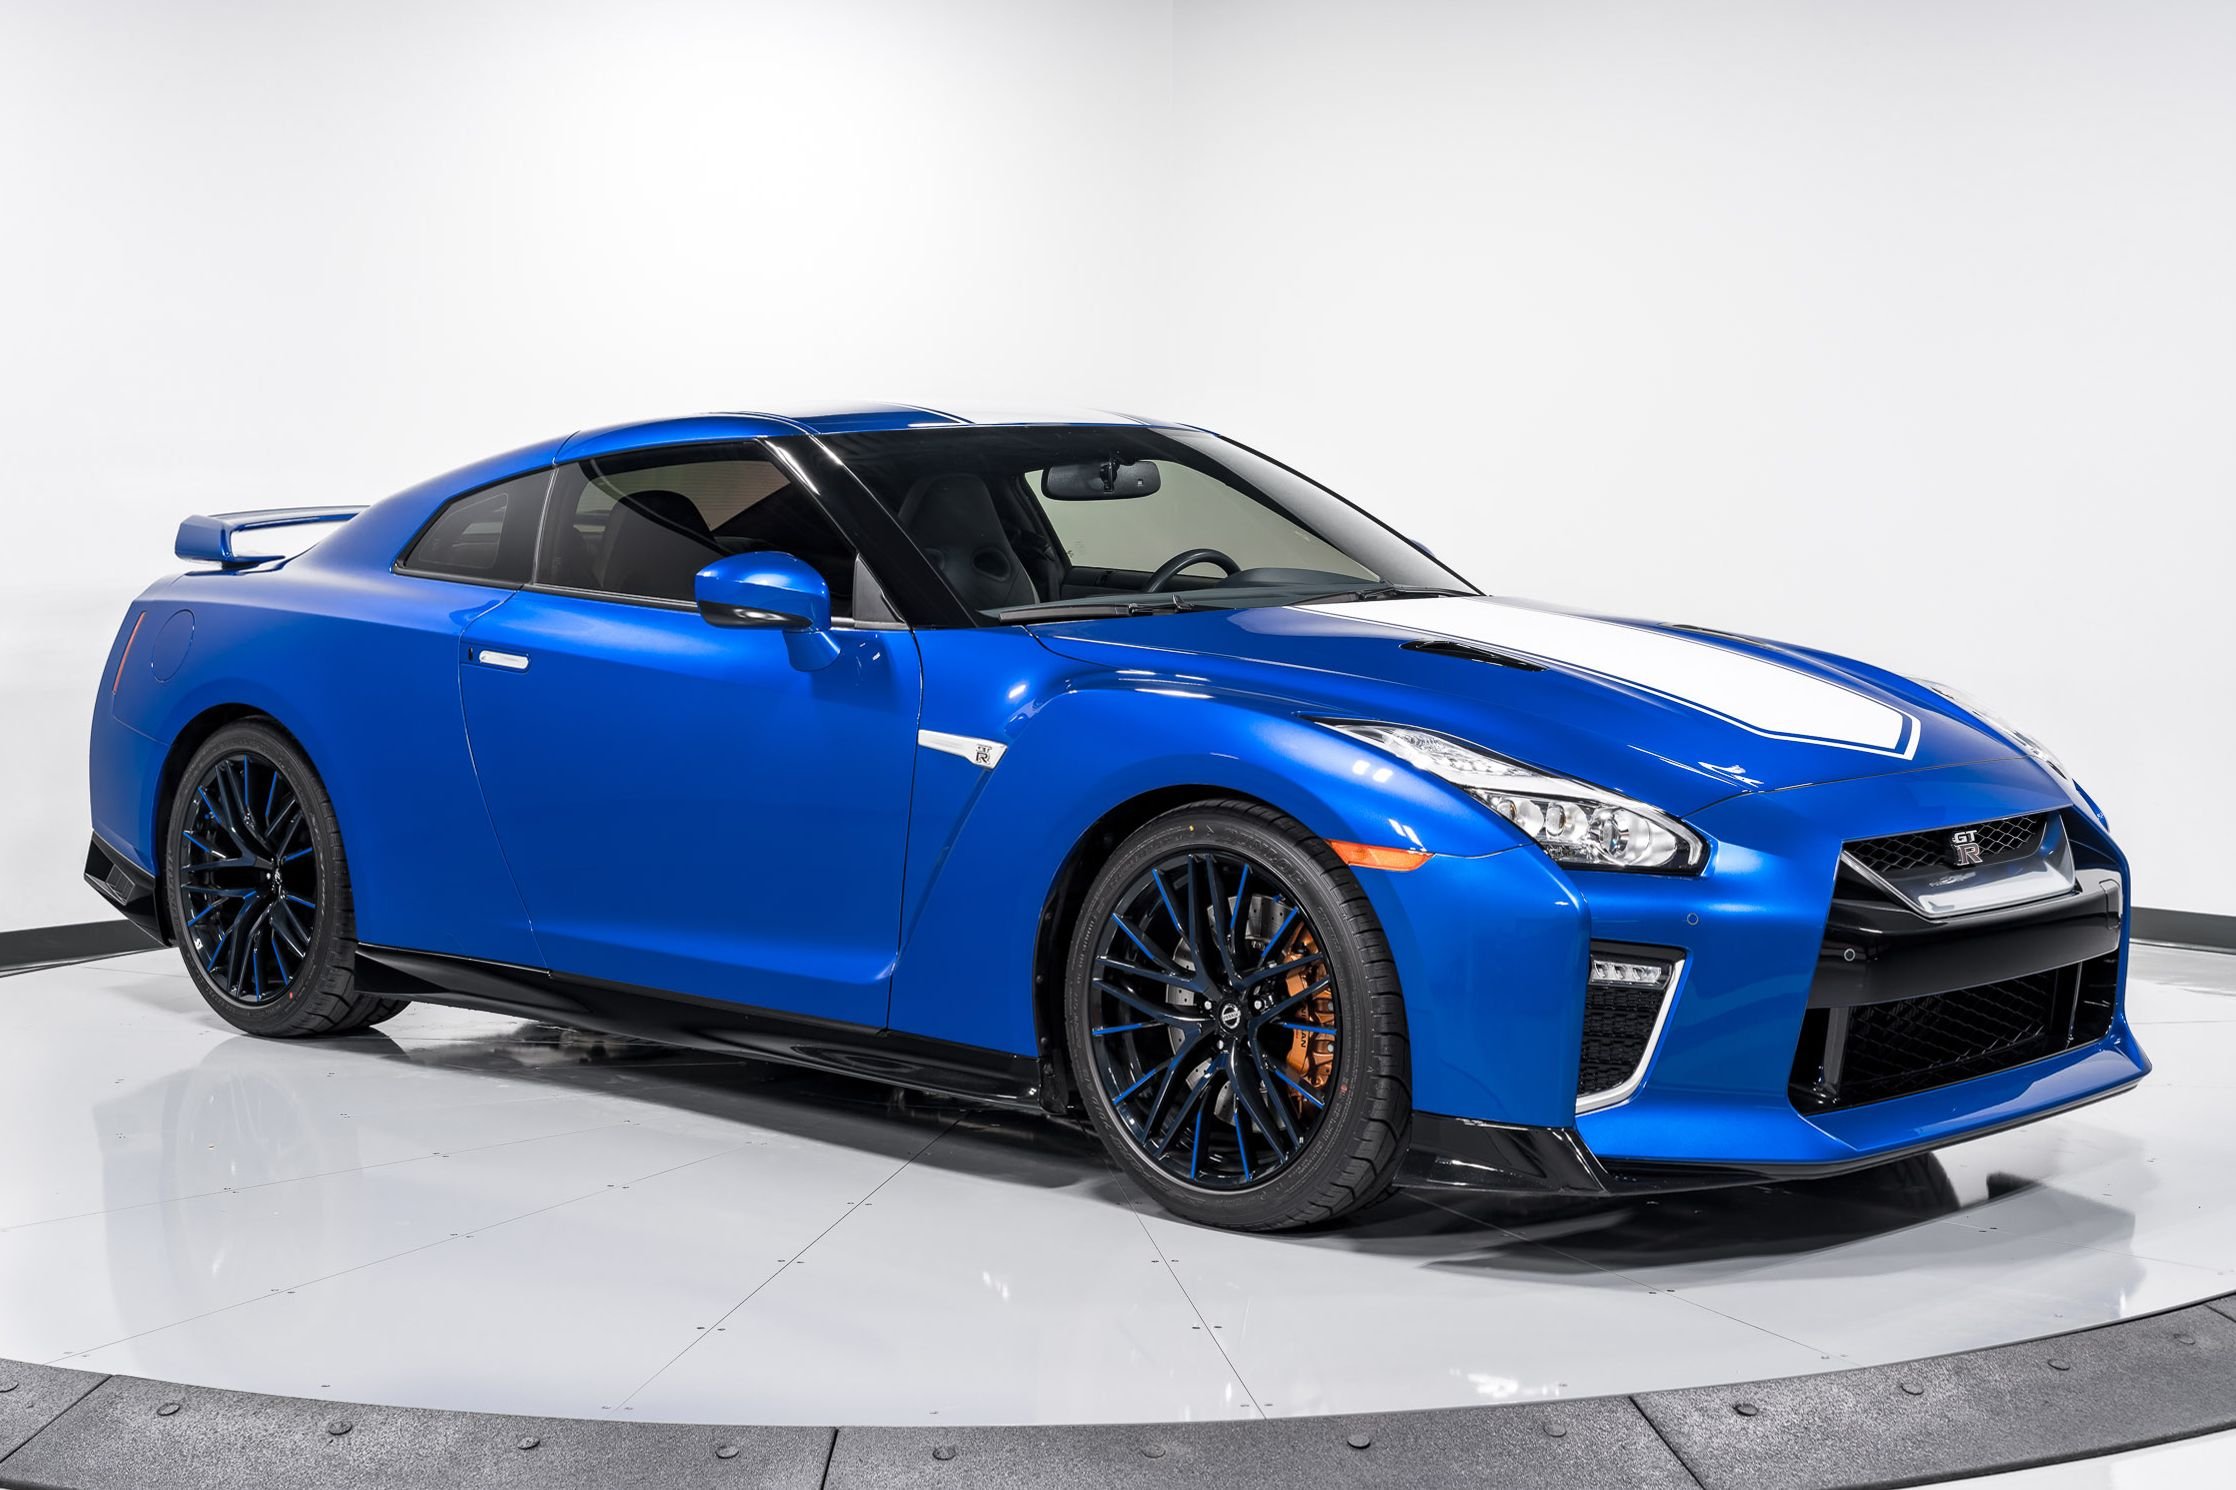 Used 2020 Nissan GT-R Premium For Sale Richardson,TX | Stock 